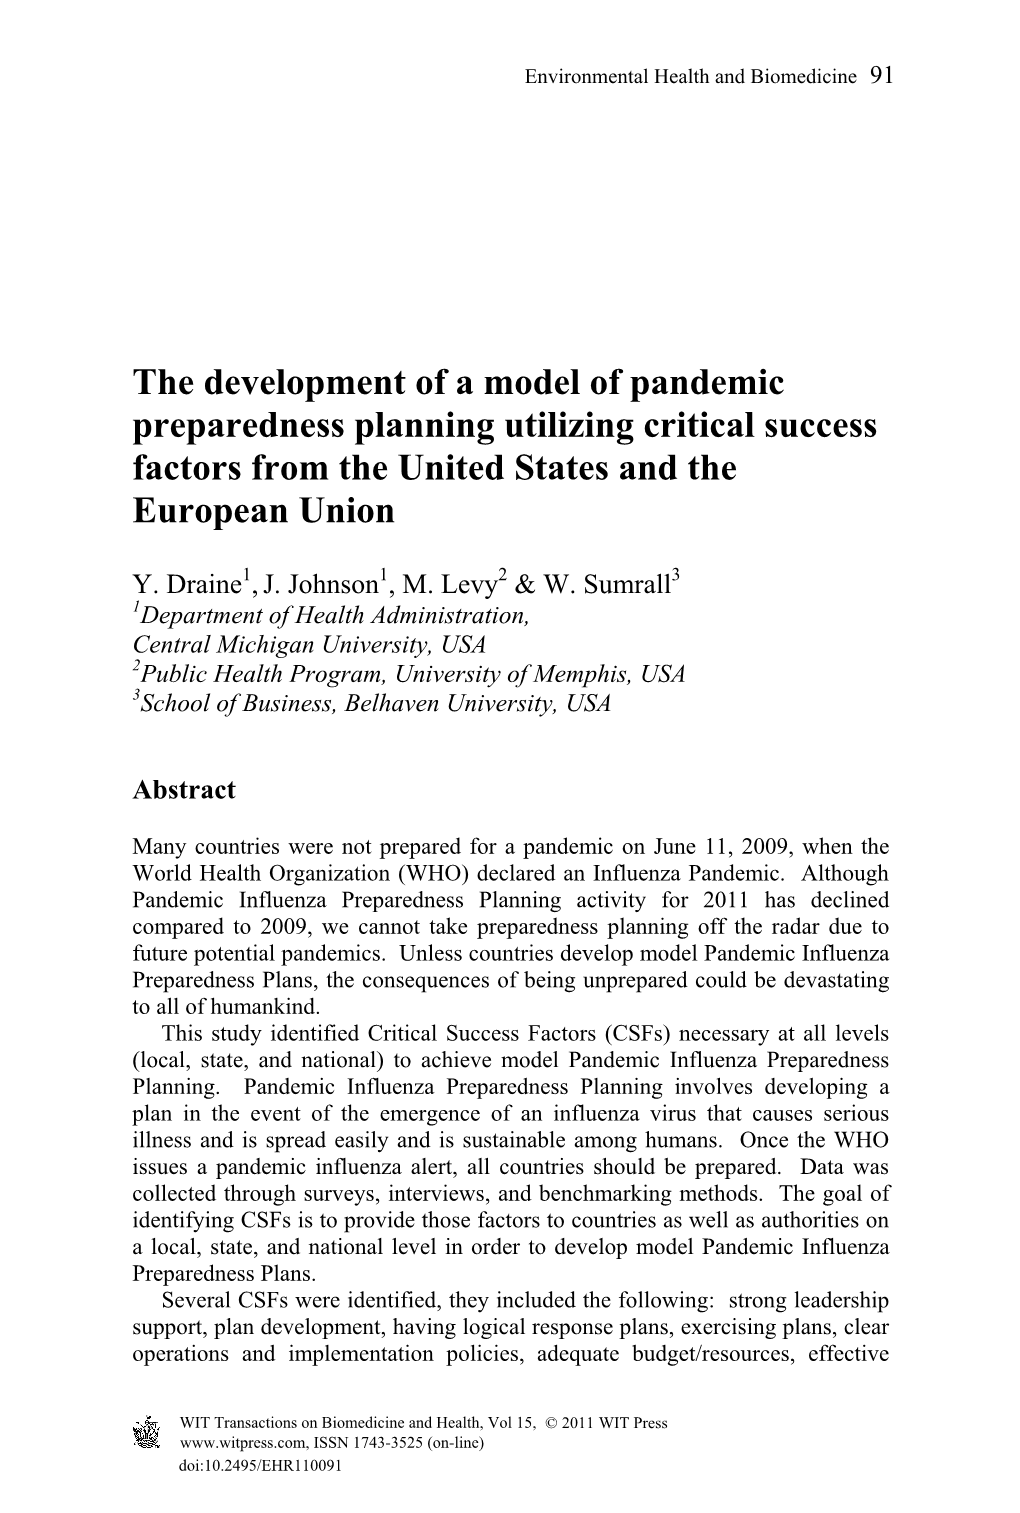 The Development of a Model of Pandemic Preparedness Planning Utilizing Critical Success Factors from the United States and the European Union